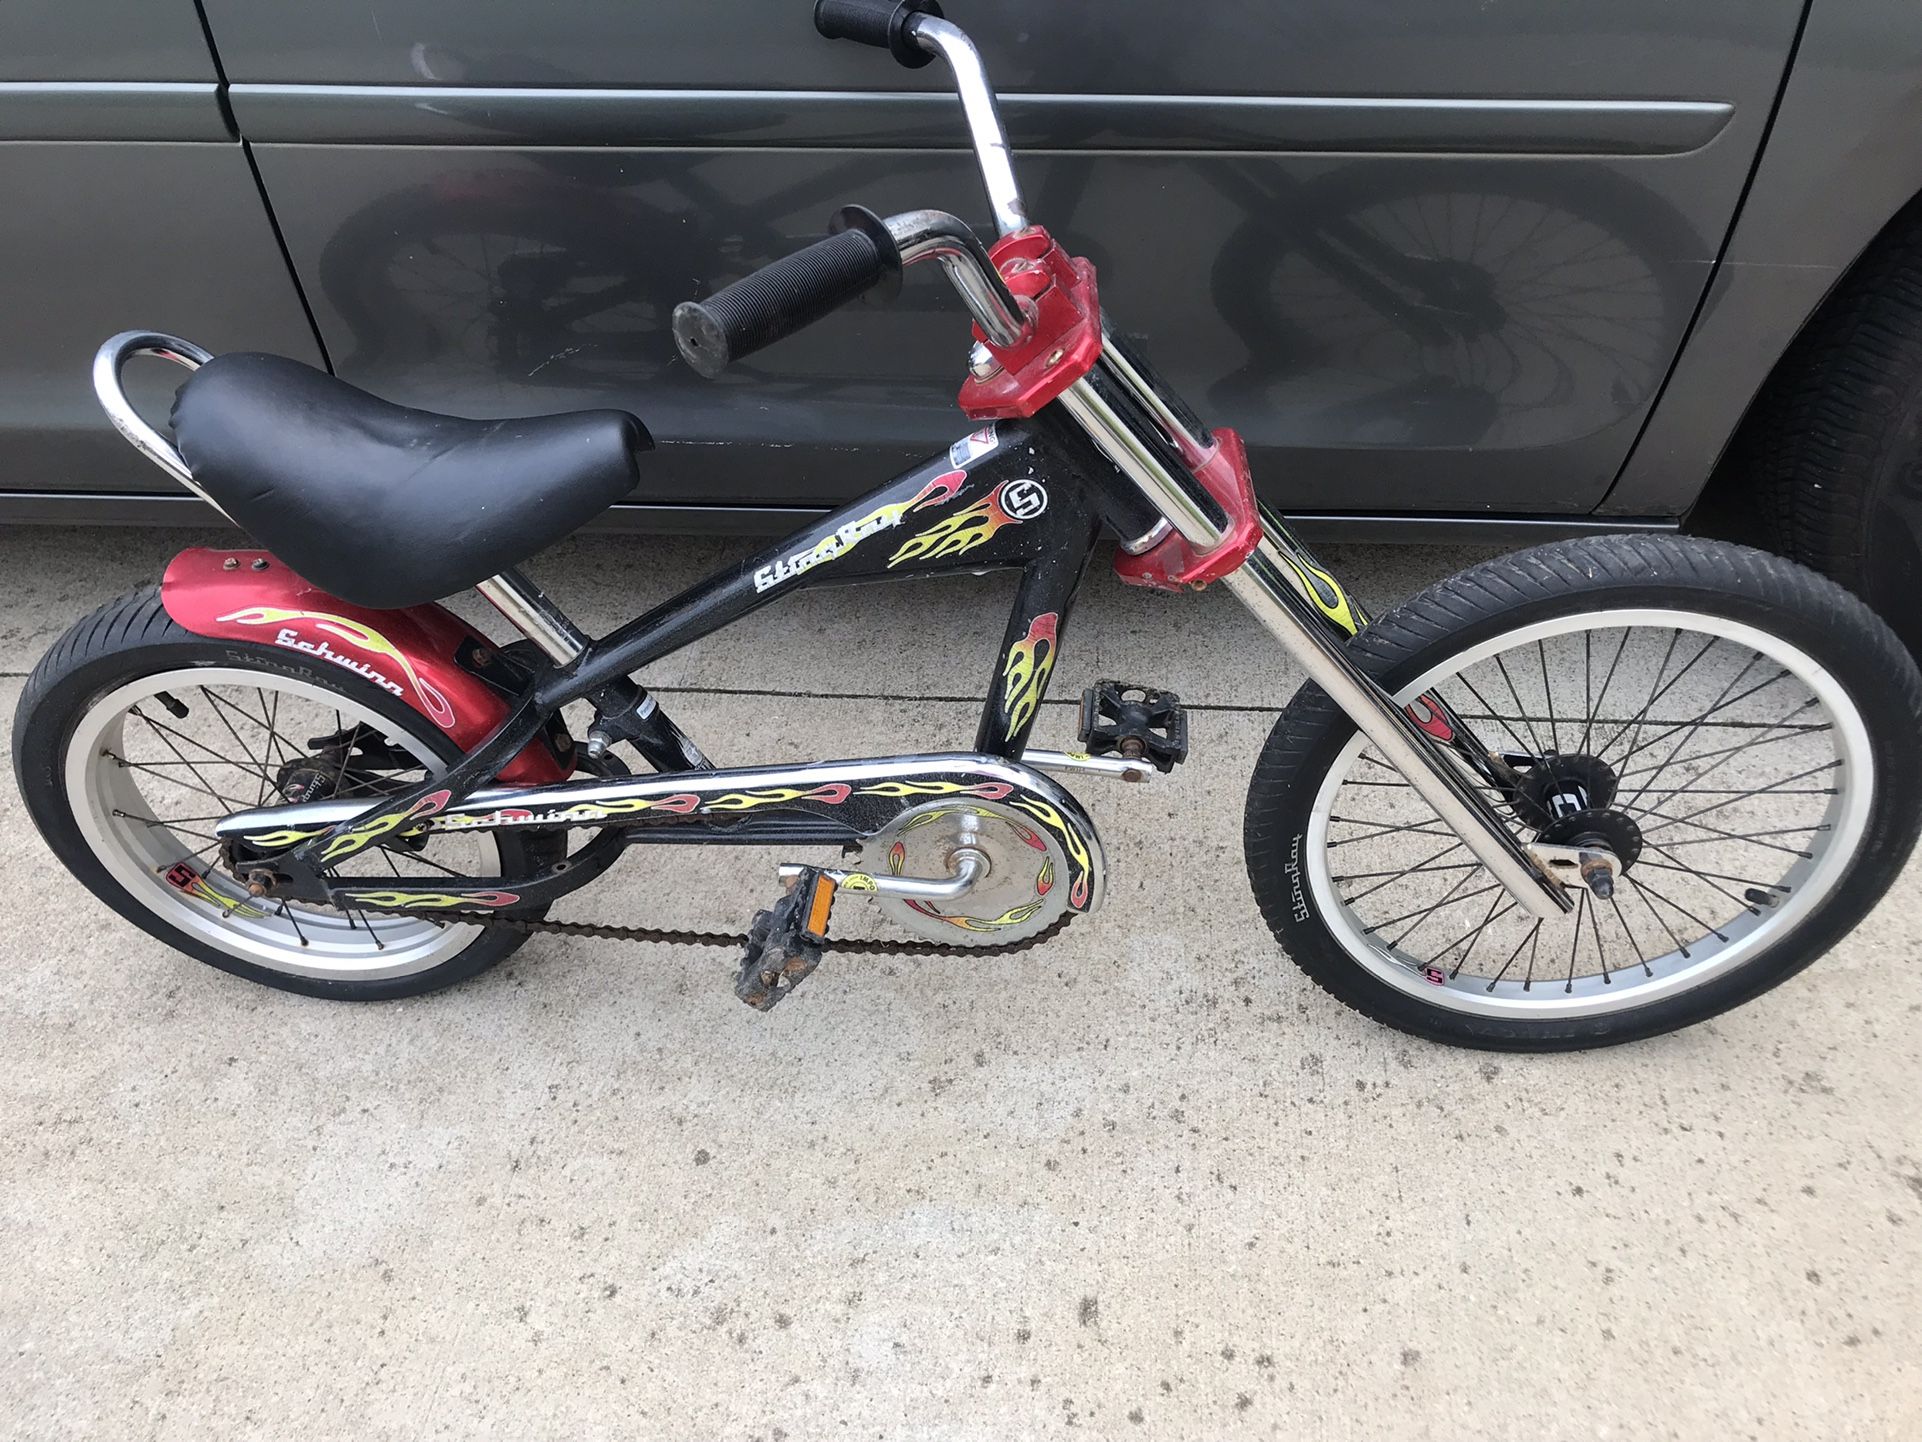 Kids’s 18” Motorcycle Design Steel Schwinn Stingray From The 90s In Great Riding Condition. No Rust Or Any Issues